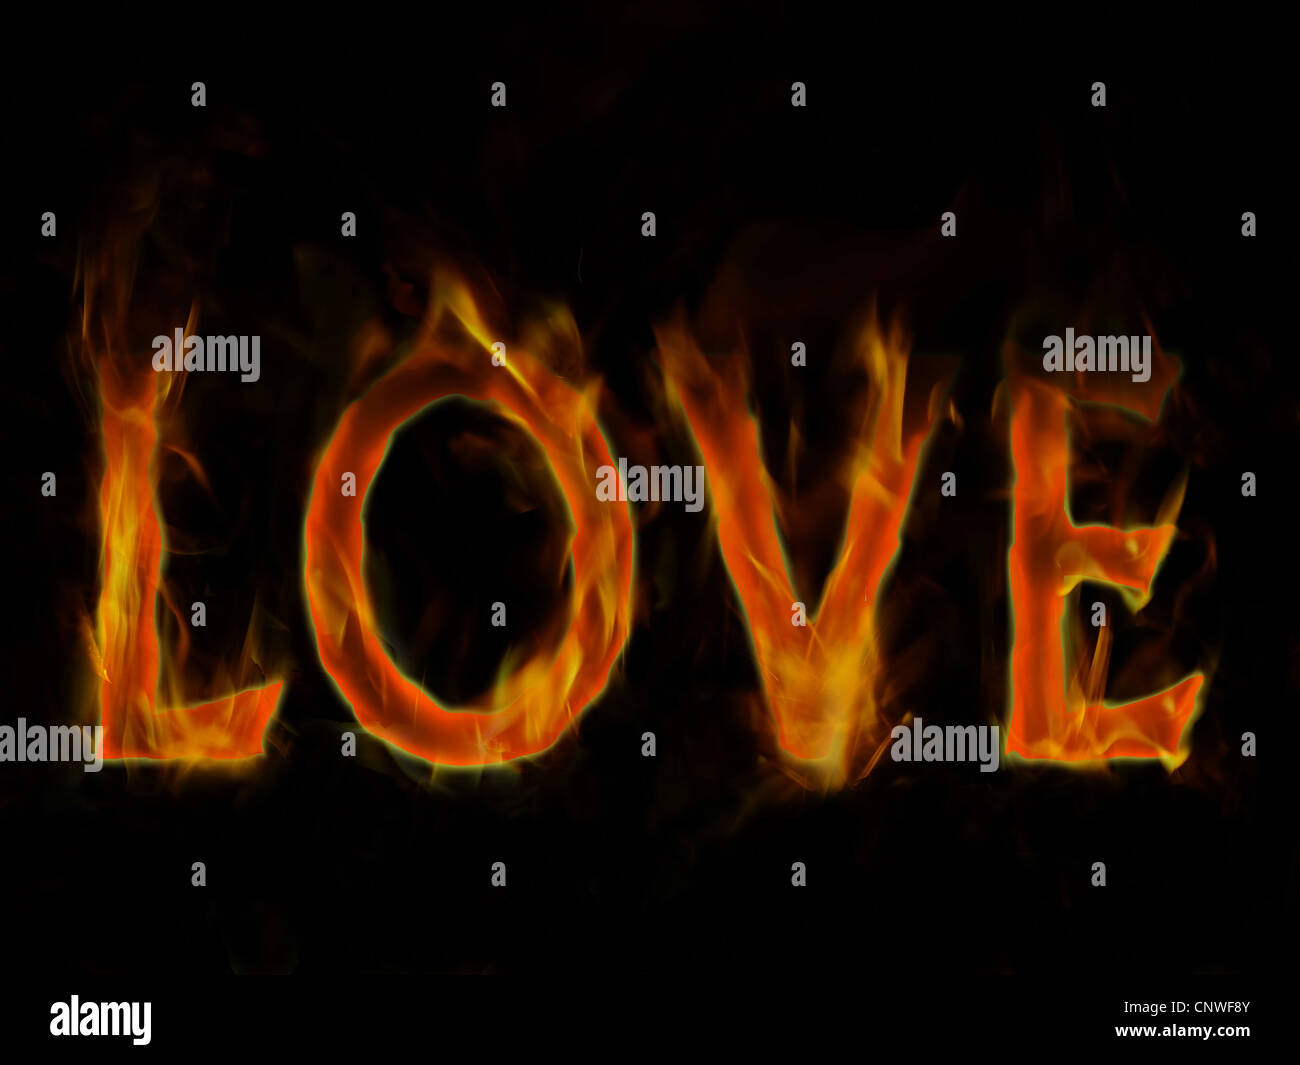 Love word in flames on black background Stock Photo